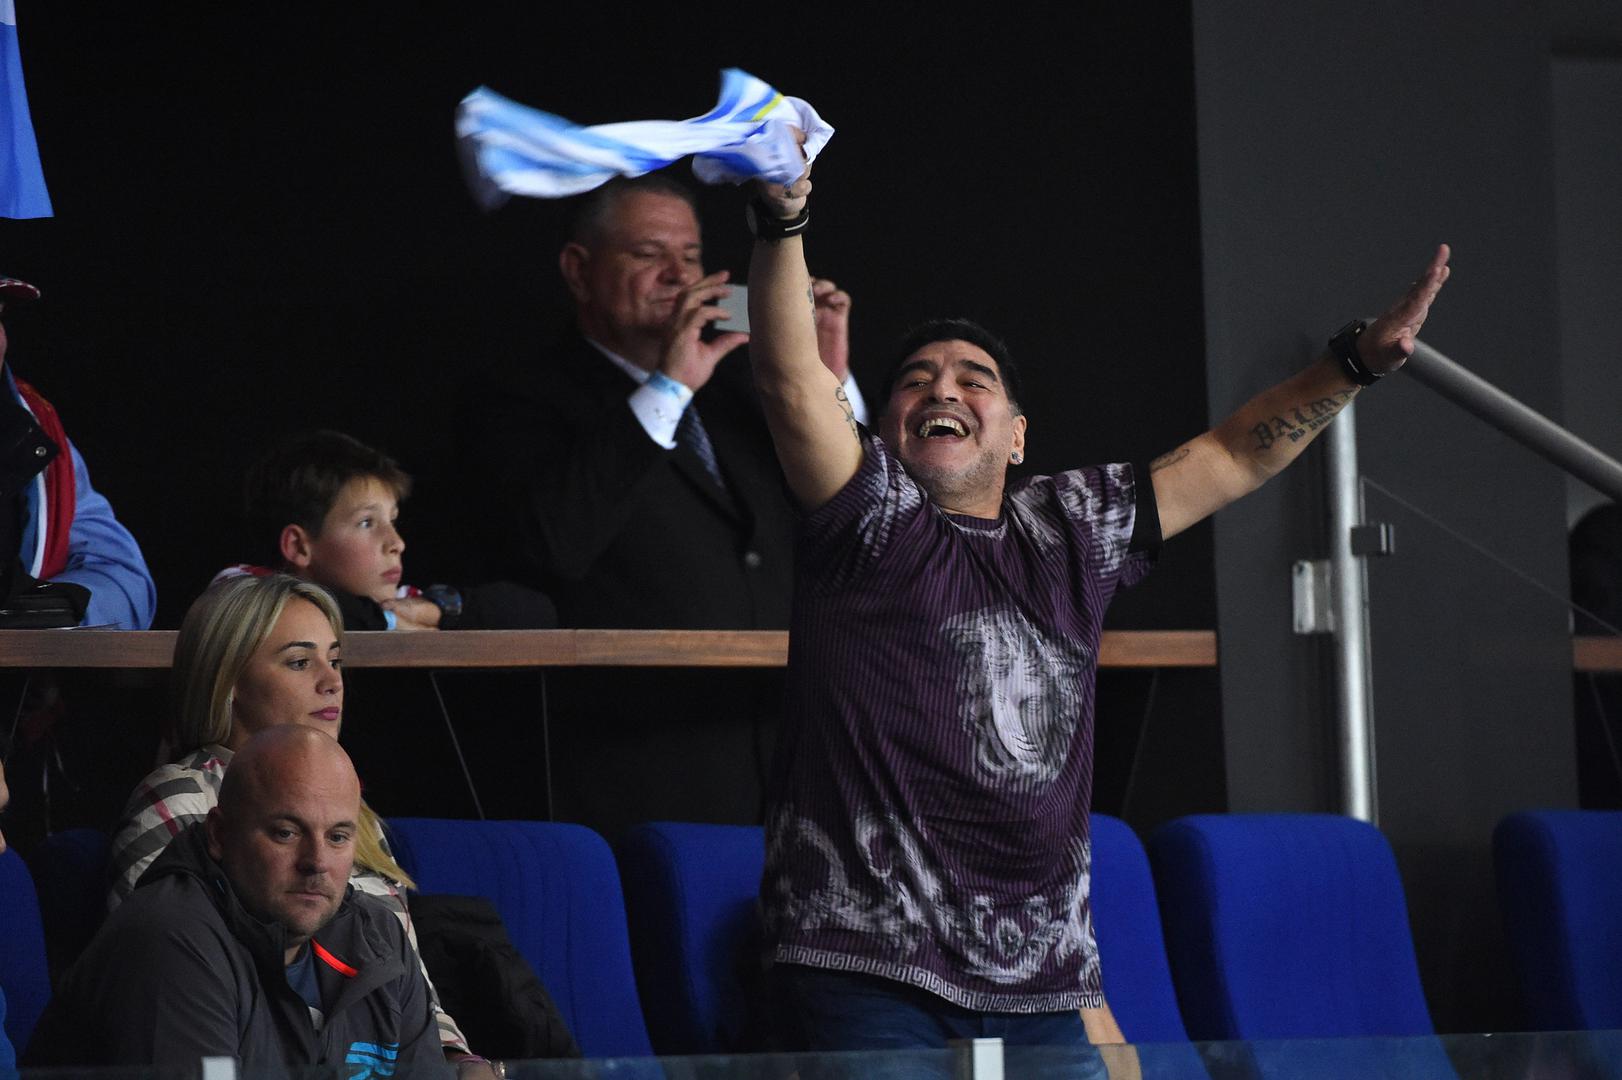 Diego Maradona At Davis Cup Final Men's Double - Zagreb Former Argentinian soccer player Diego Maradona attends the double match at the Davis Cup final tie between Croatia and Argentinia at the Arena, Zagreb, Croatia on november, 26, 2016. Photo by Corinne Dubreuil/ABACAPRESS.COM Dubreuil Corinne/ABACA /PIXSELL